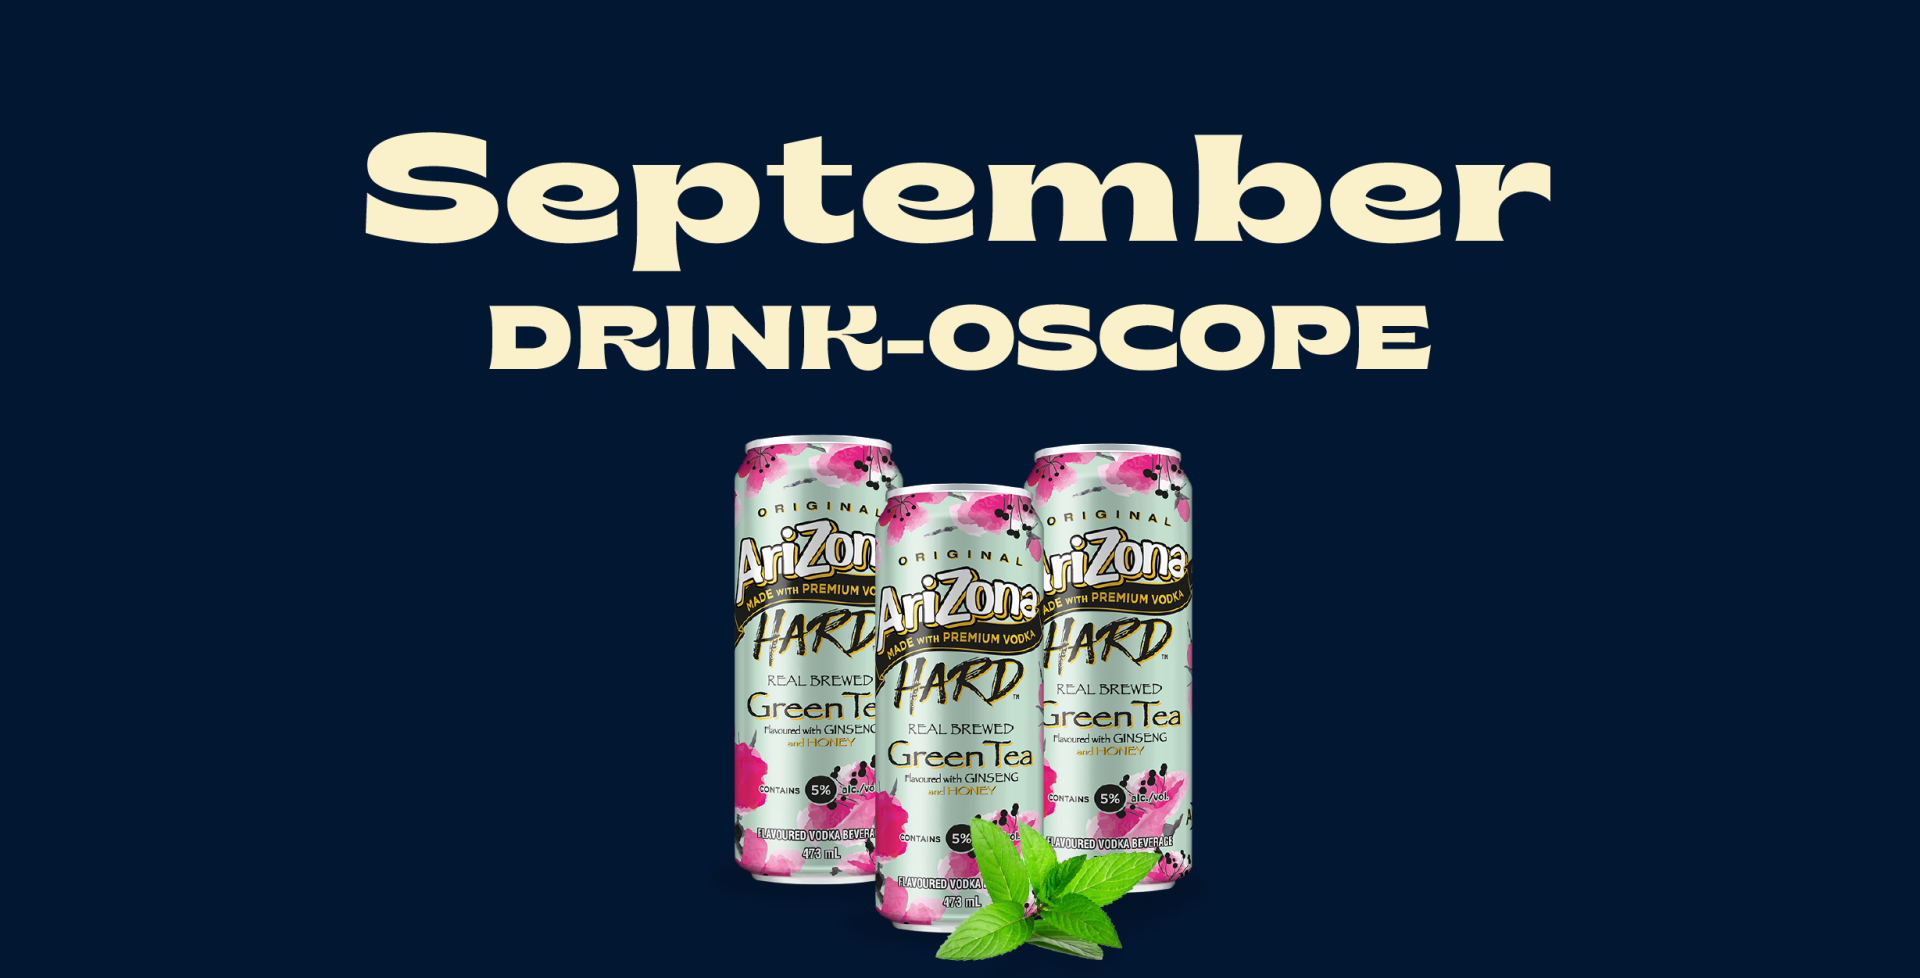 September Drink-oscope: The Best Cocktail for your Star Sign